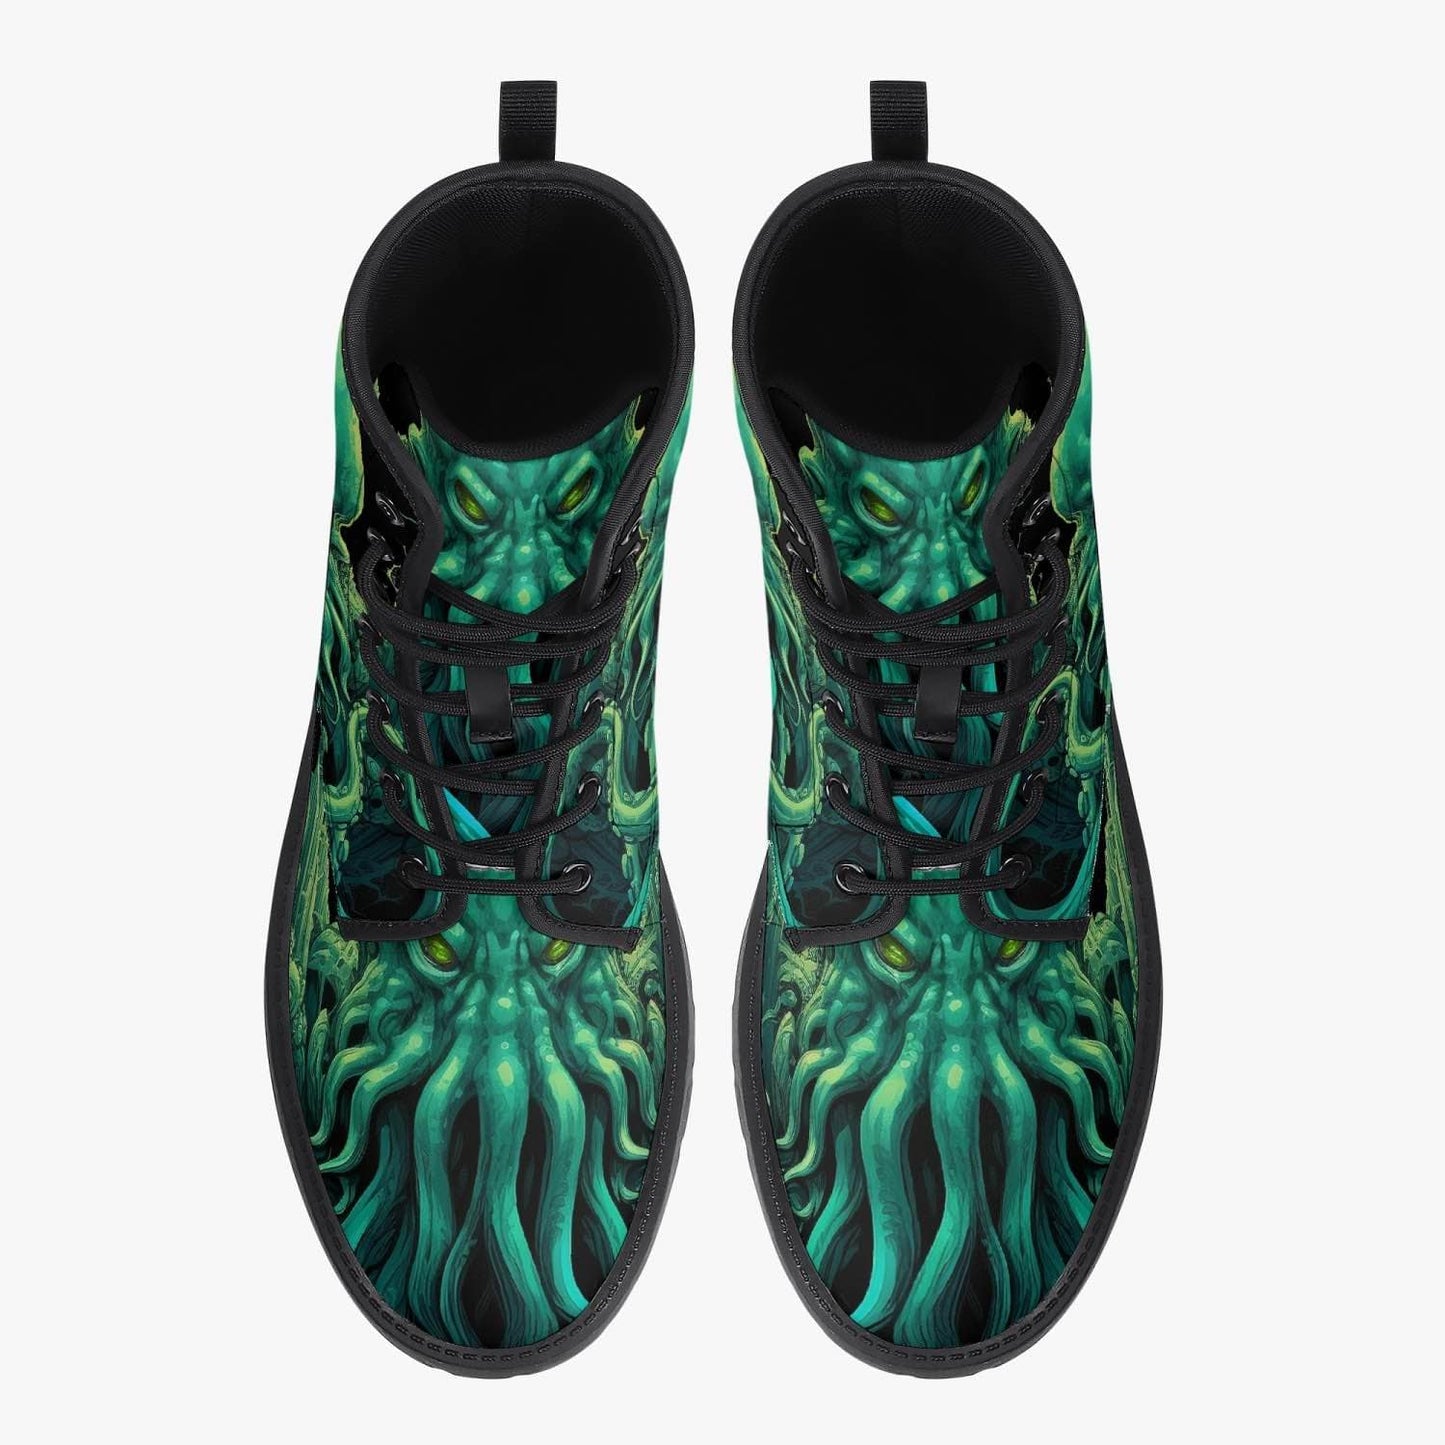 top view of the mighty deep vibrant green and black Cthulhu sea monster on vegan leather boots at Gallery Serpentine